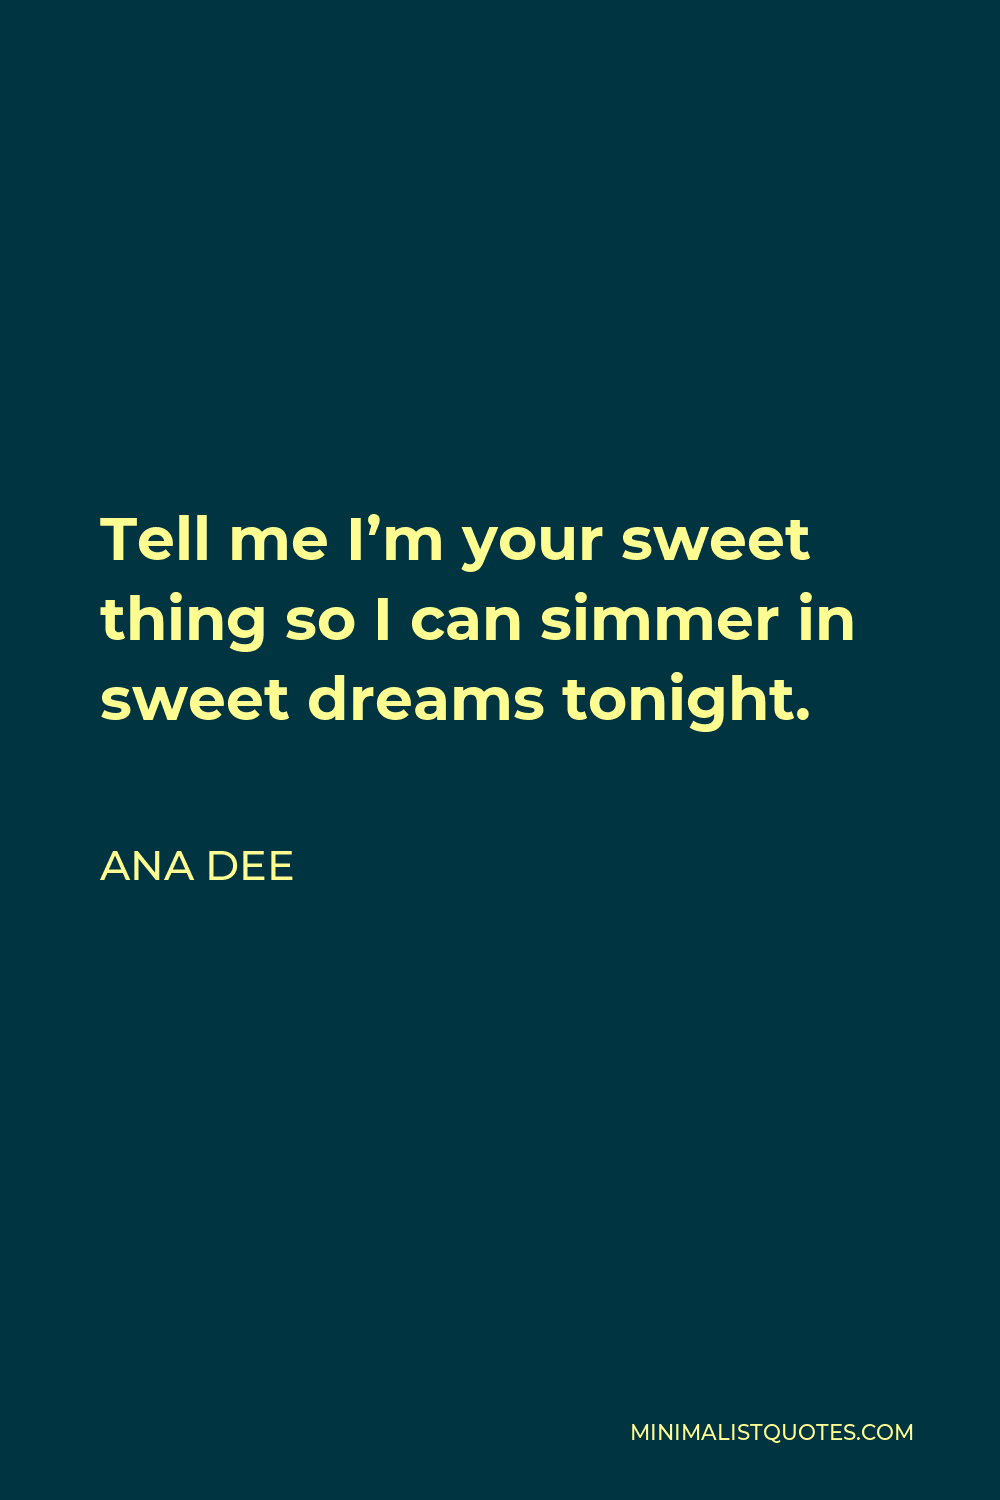 Ana Dee Quote - Tell me I’m your sweet thing so I can simmer in sweet dreams tonight.